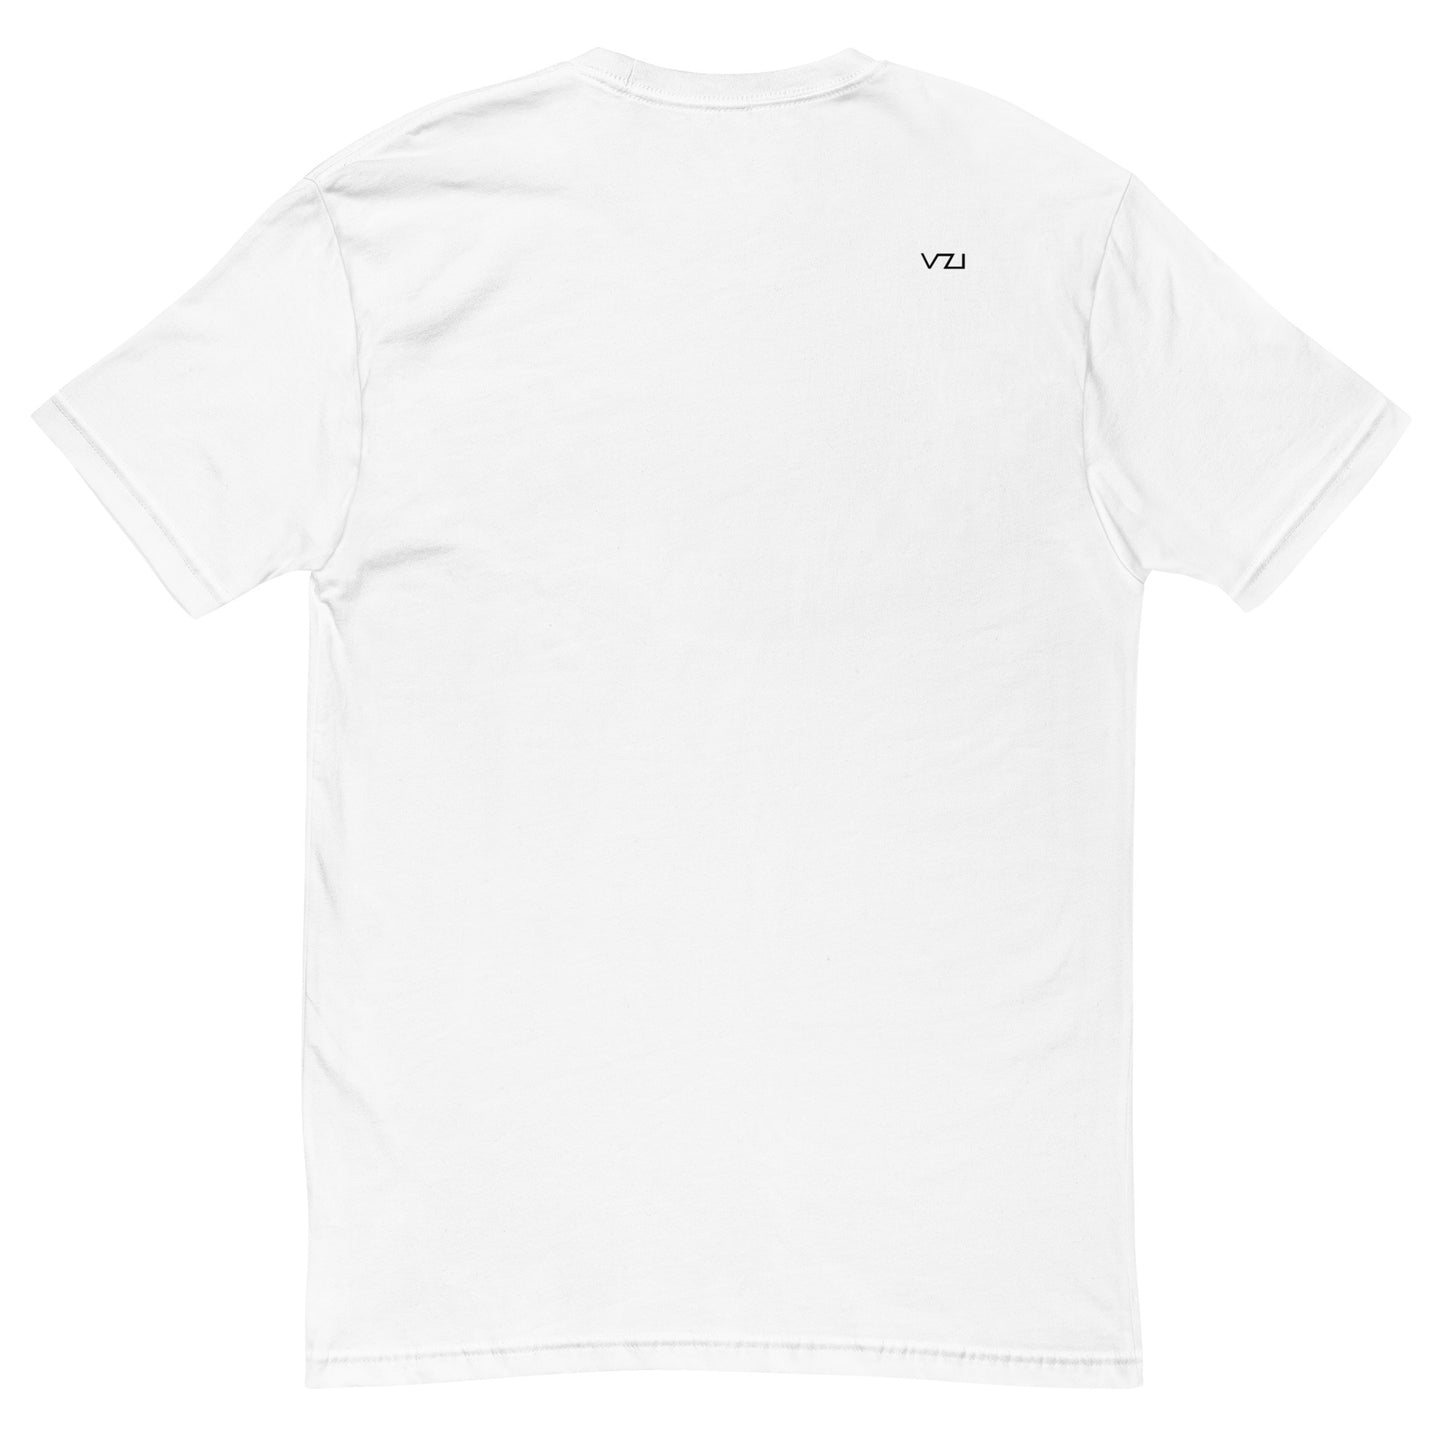 VZI Couture: Men's Fitted T-Shirt - Digital Meditation, Smart Casual, Streetwear